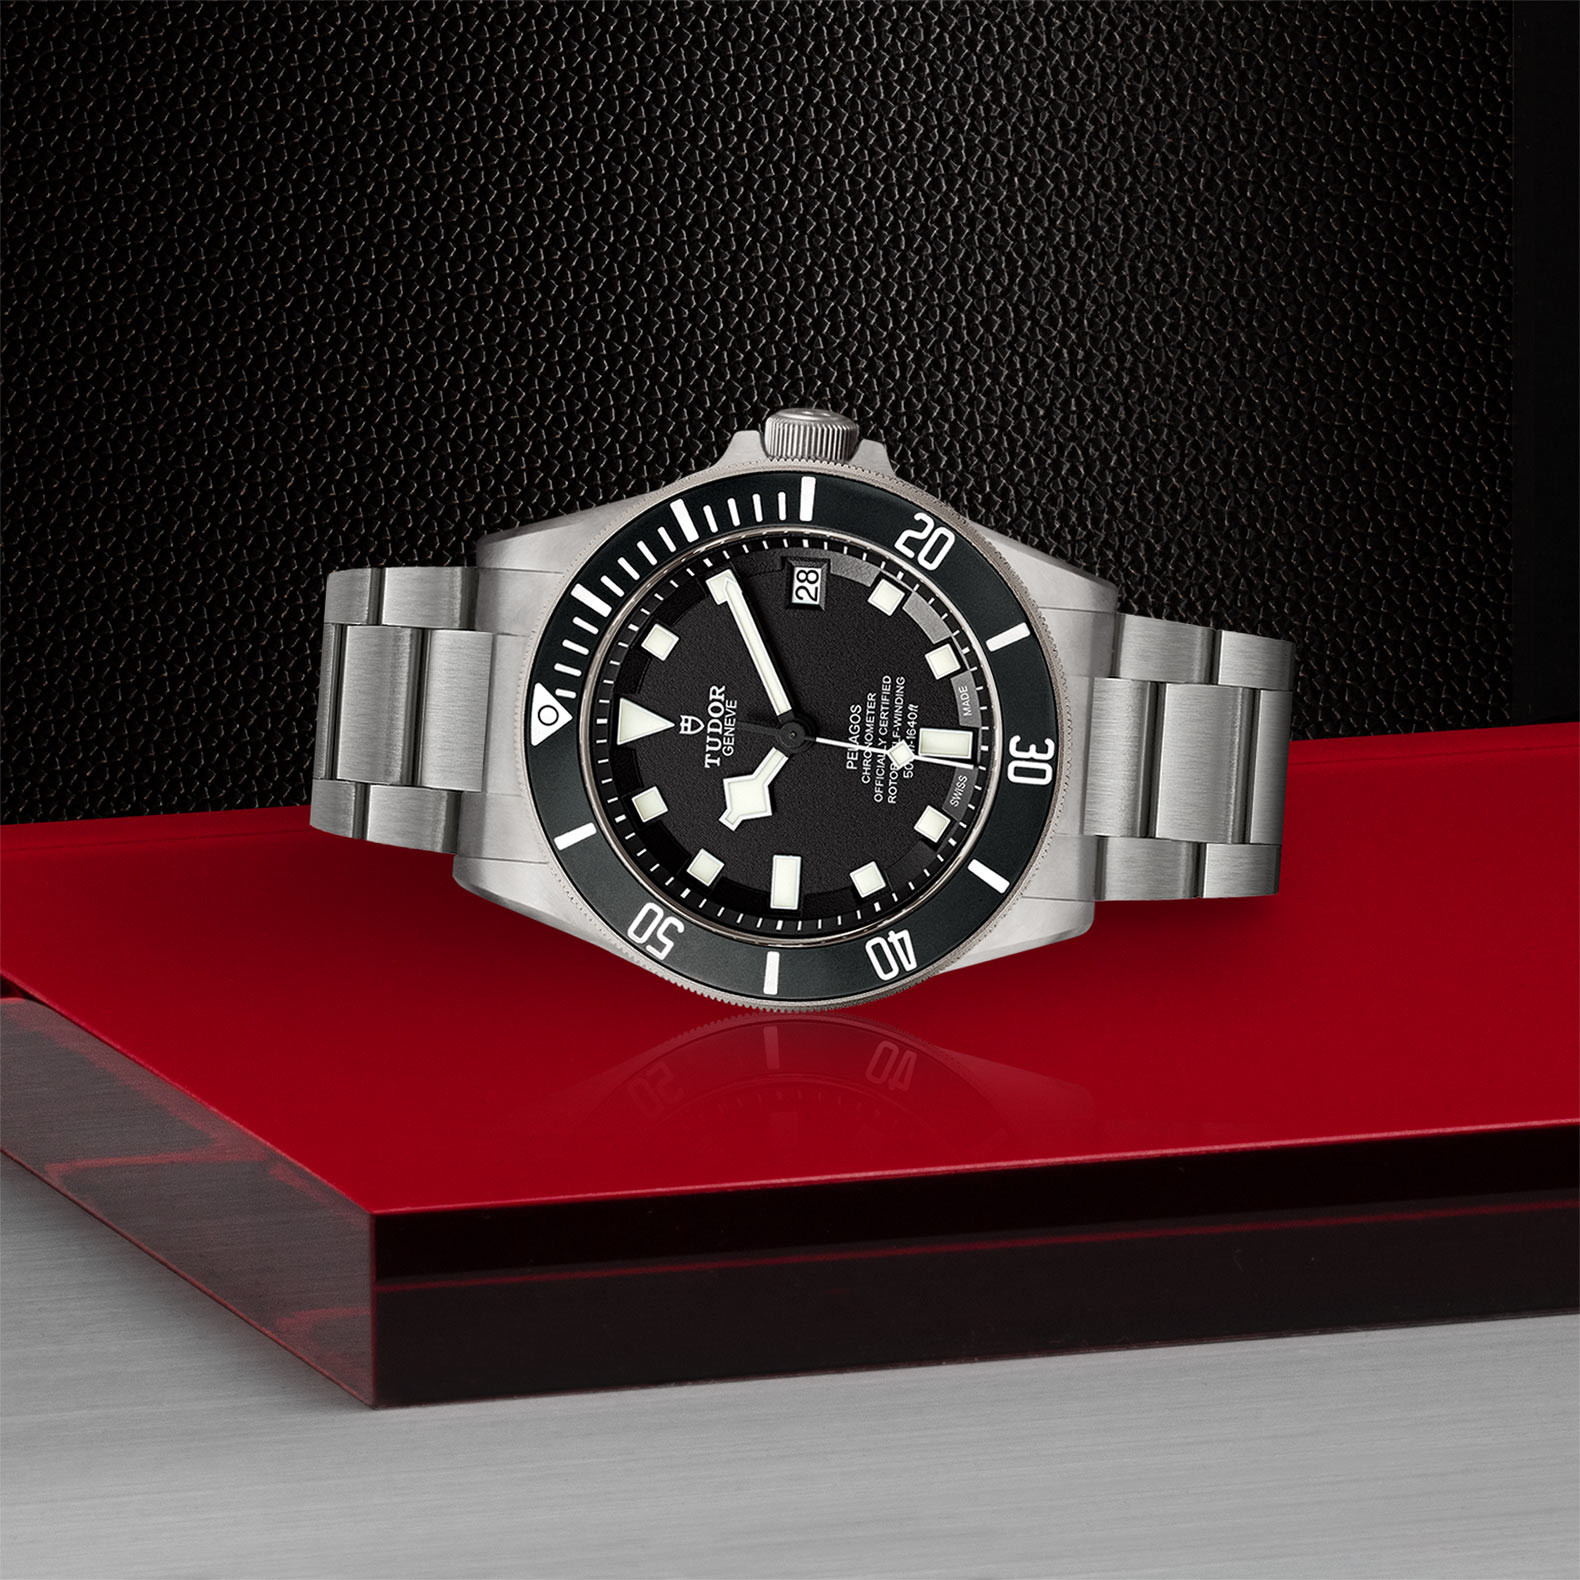 TUDOR Pelagos Watch in Store Laying Down